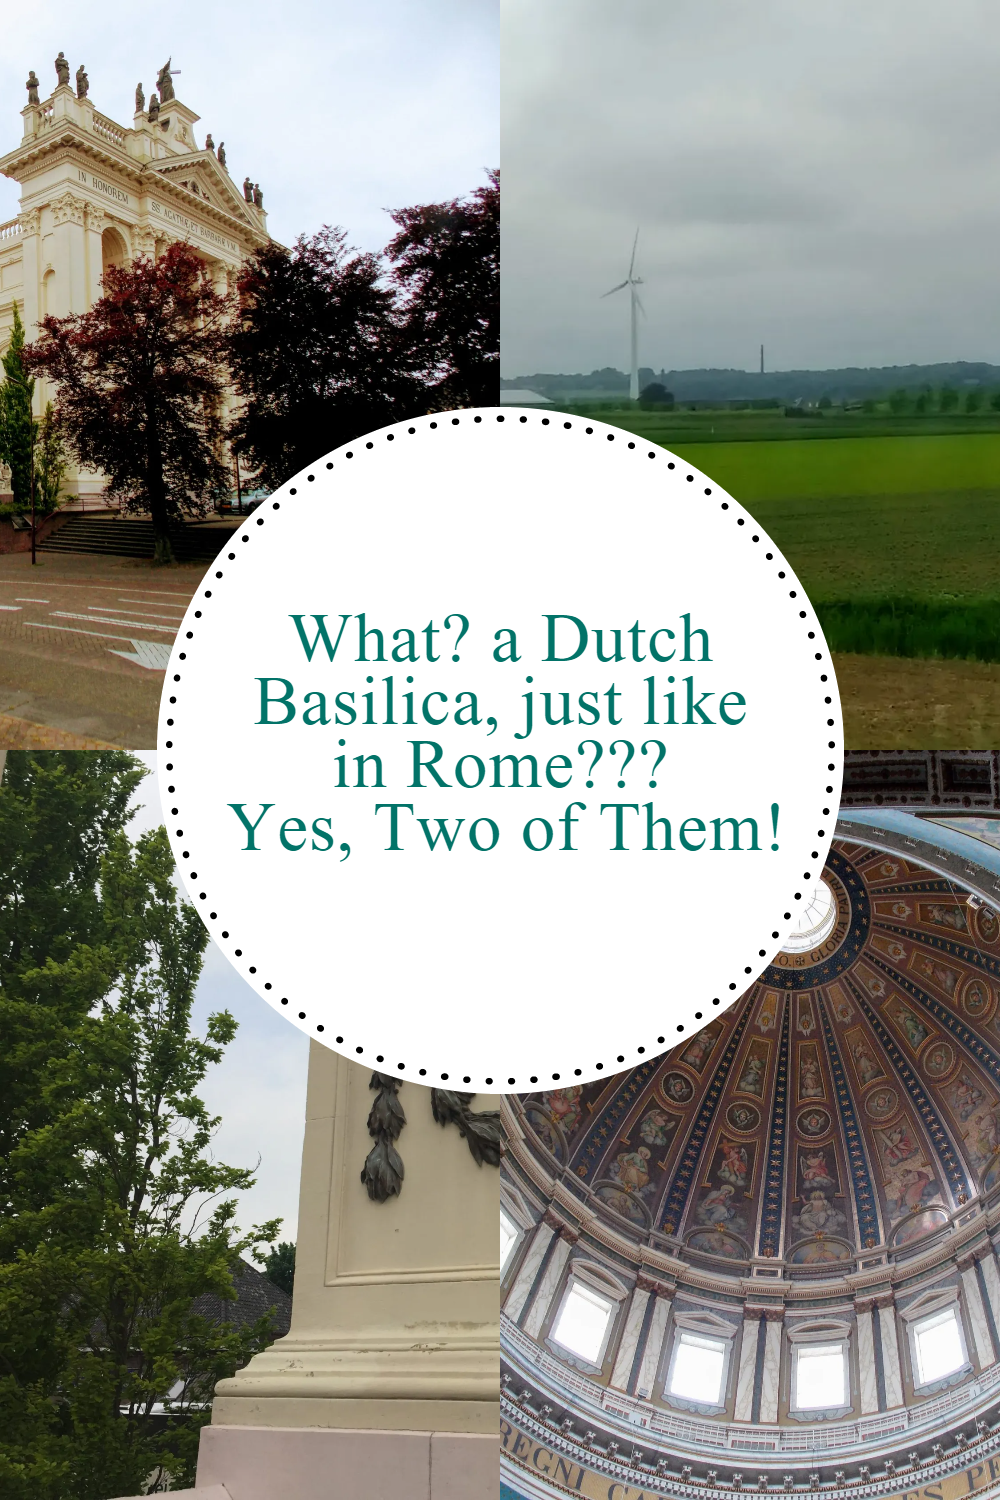 All You Need to Know: St Peter’s Basilica in Oudenbosch